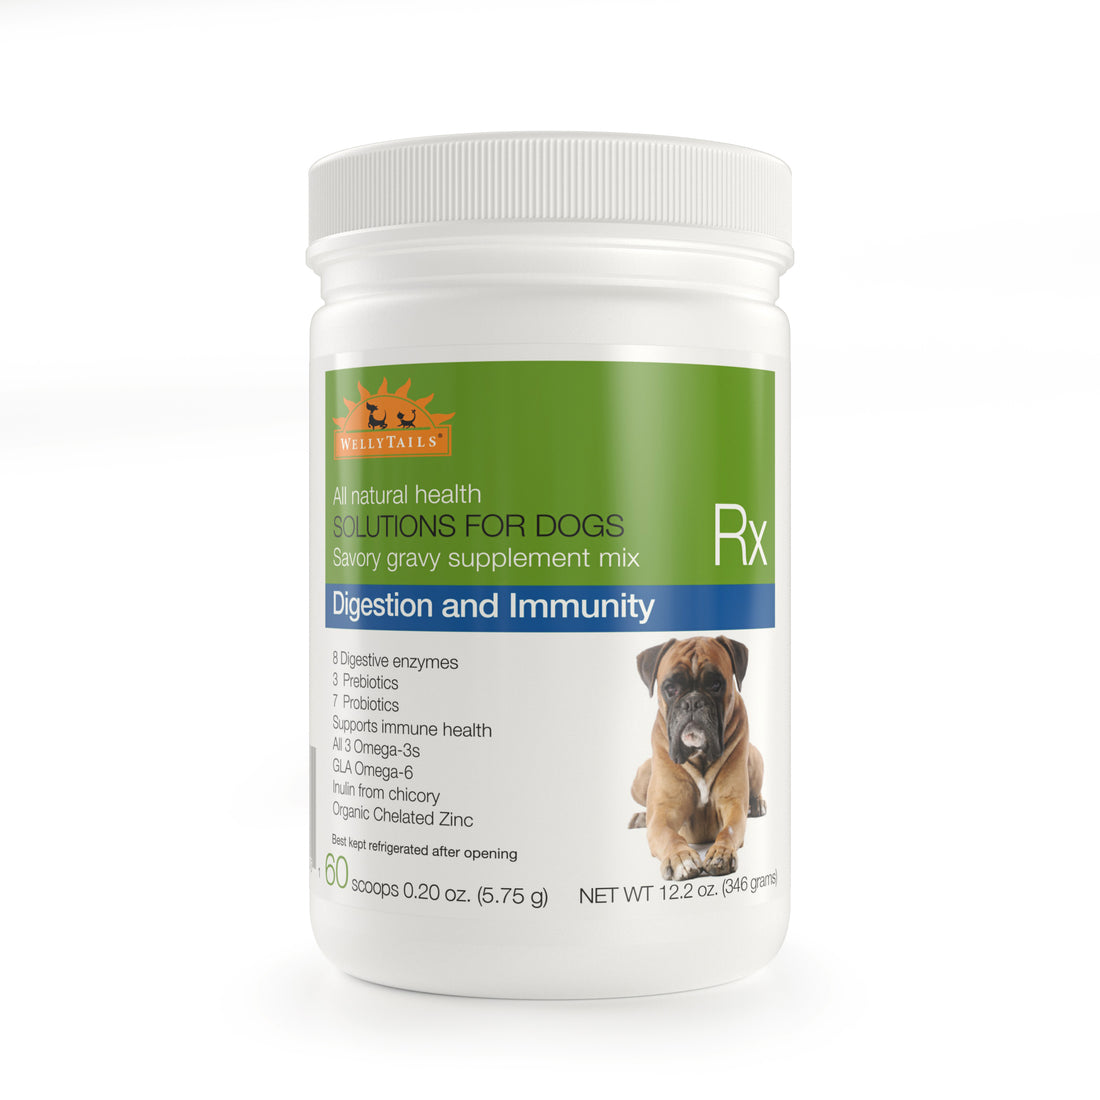 What are Probiotics and are they Beneficial for Dogs?